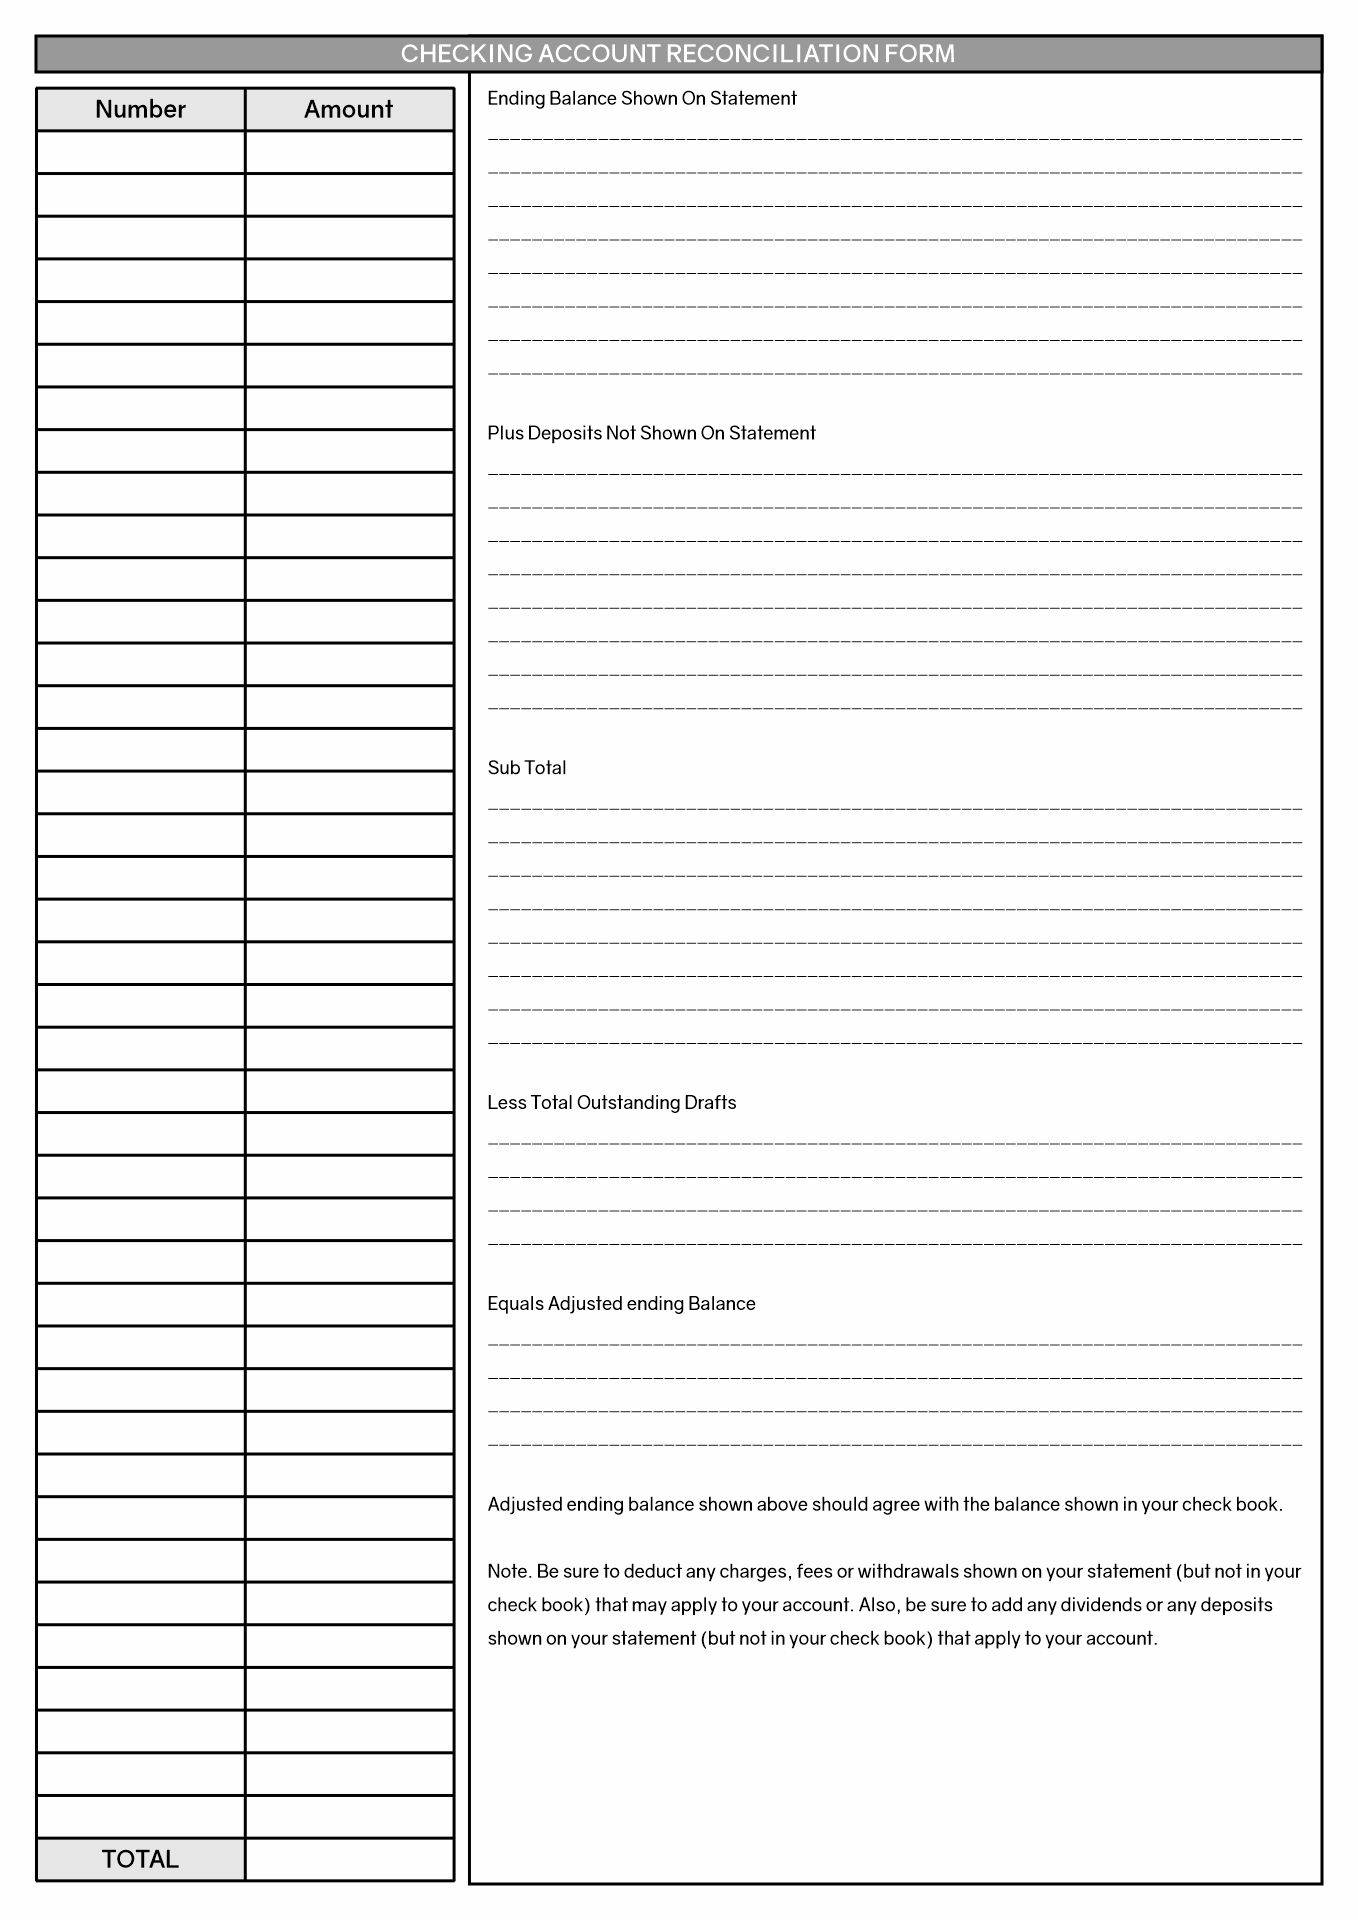 Blank Bank Reconciliation Form Image